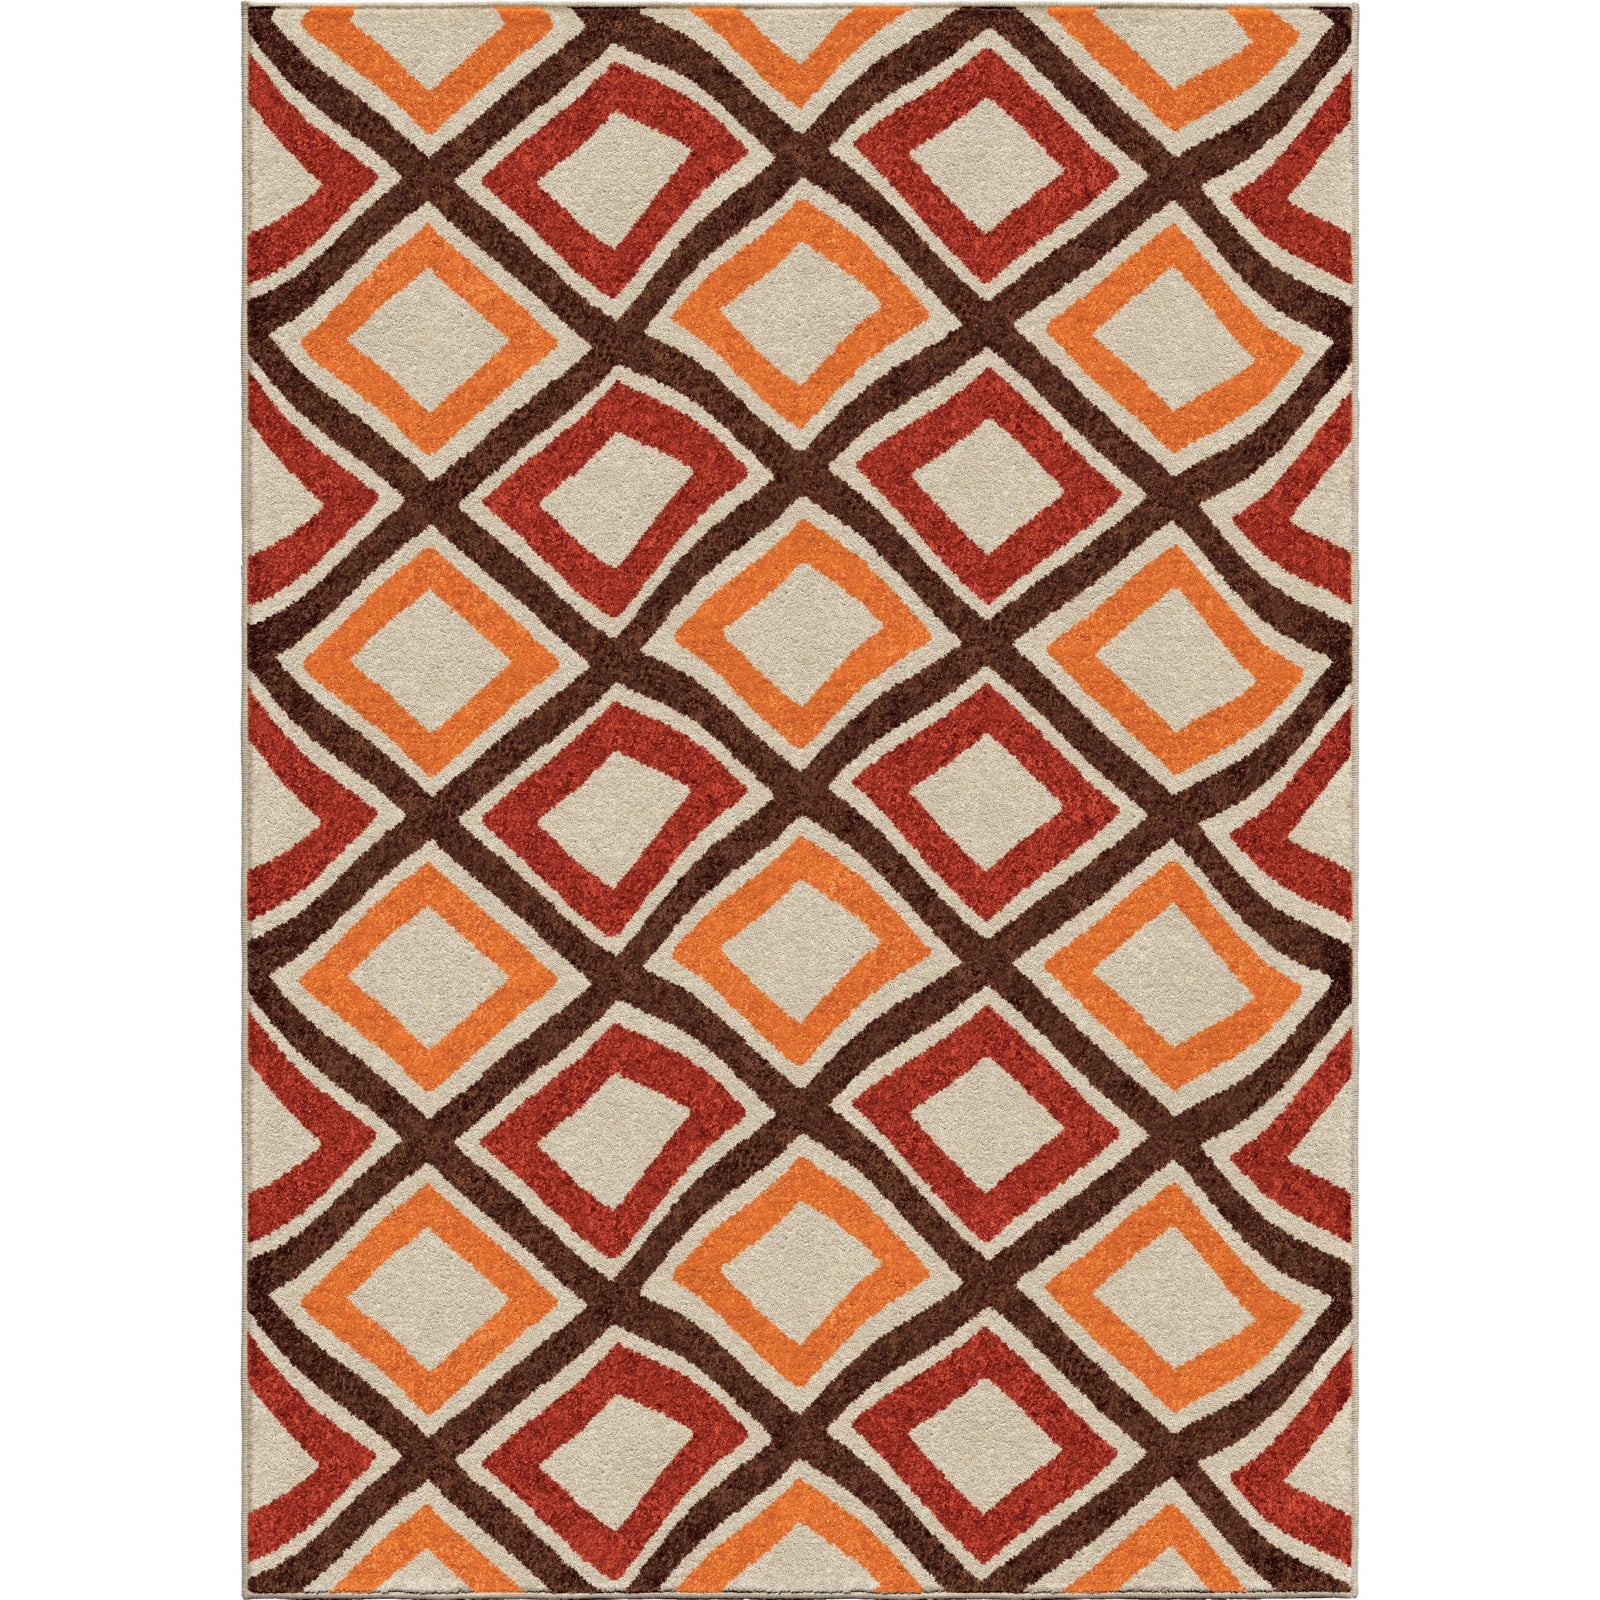 Orian Rugs Promise Swirly Squares Red Area Rug main image